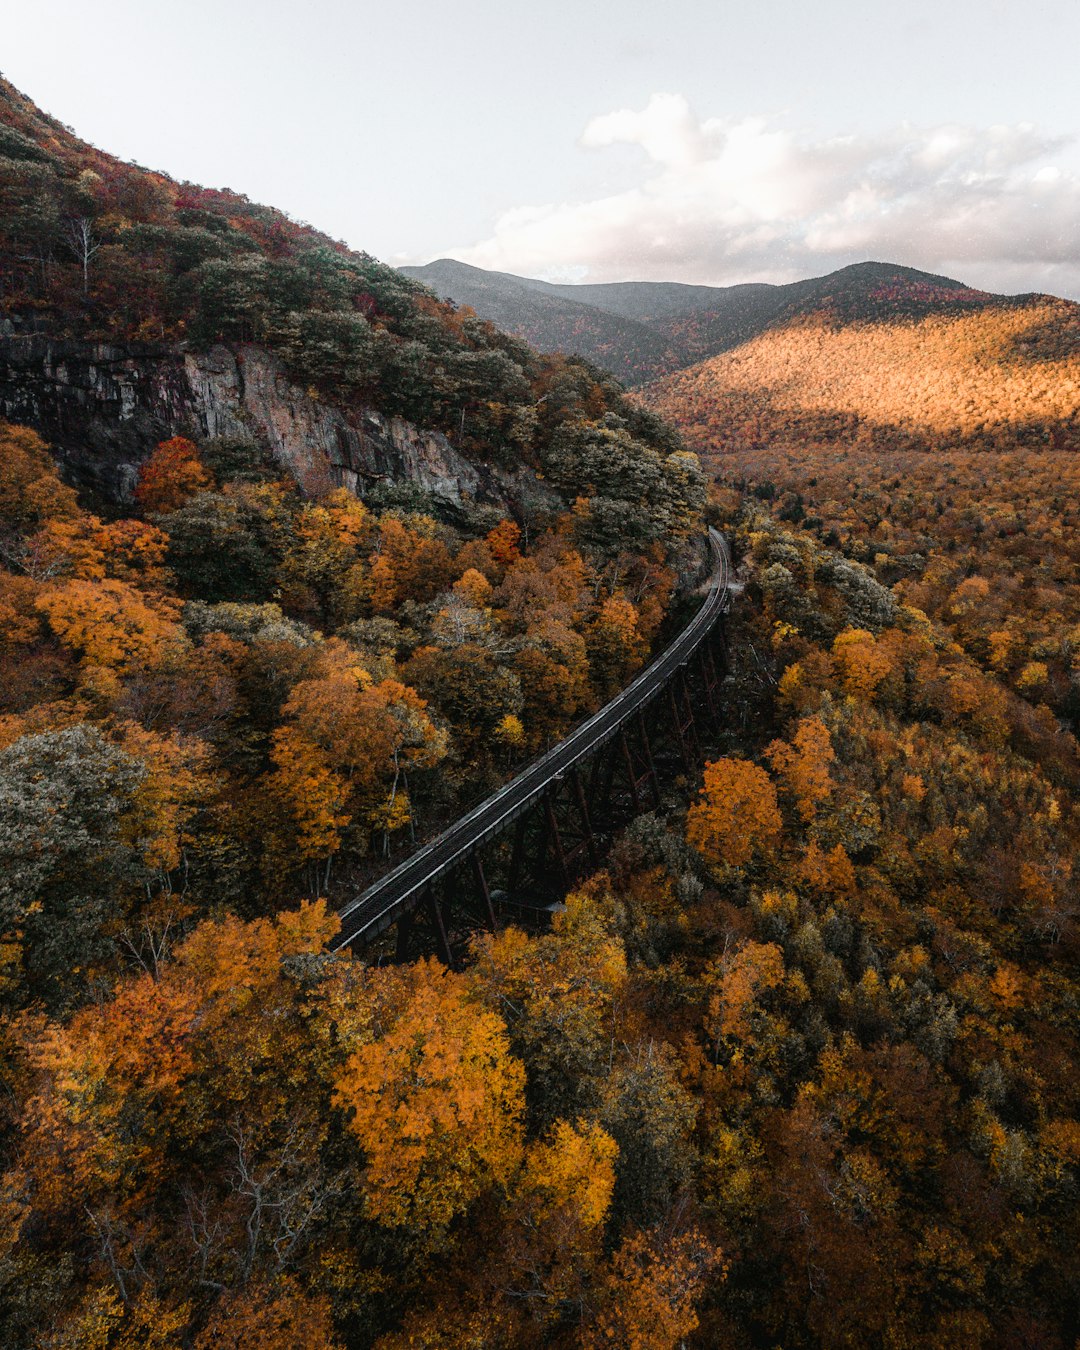 Follow me on Instagram @jevanleith for my latest content!

Here is a wide angle view of the Frankenstein Trestle in Crawford Notch of the White Mountains of NH. This was a bit past peak foliage, but still a great scene!